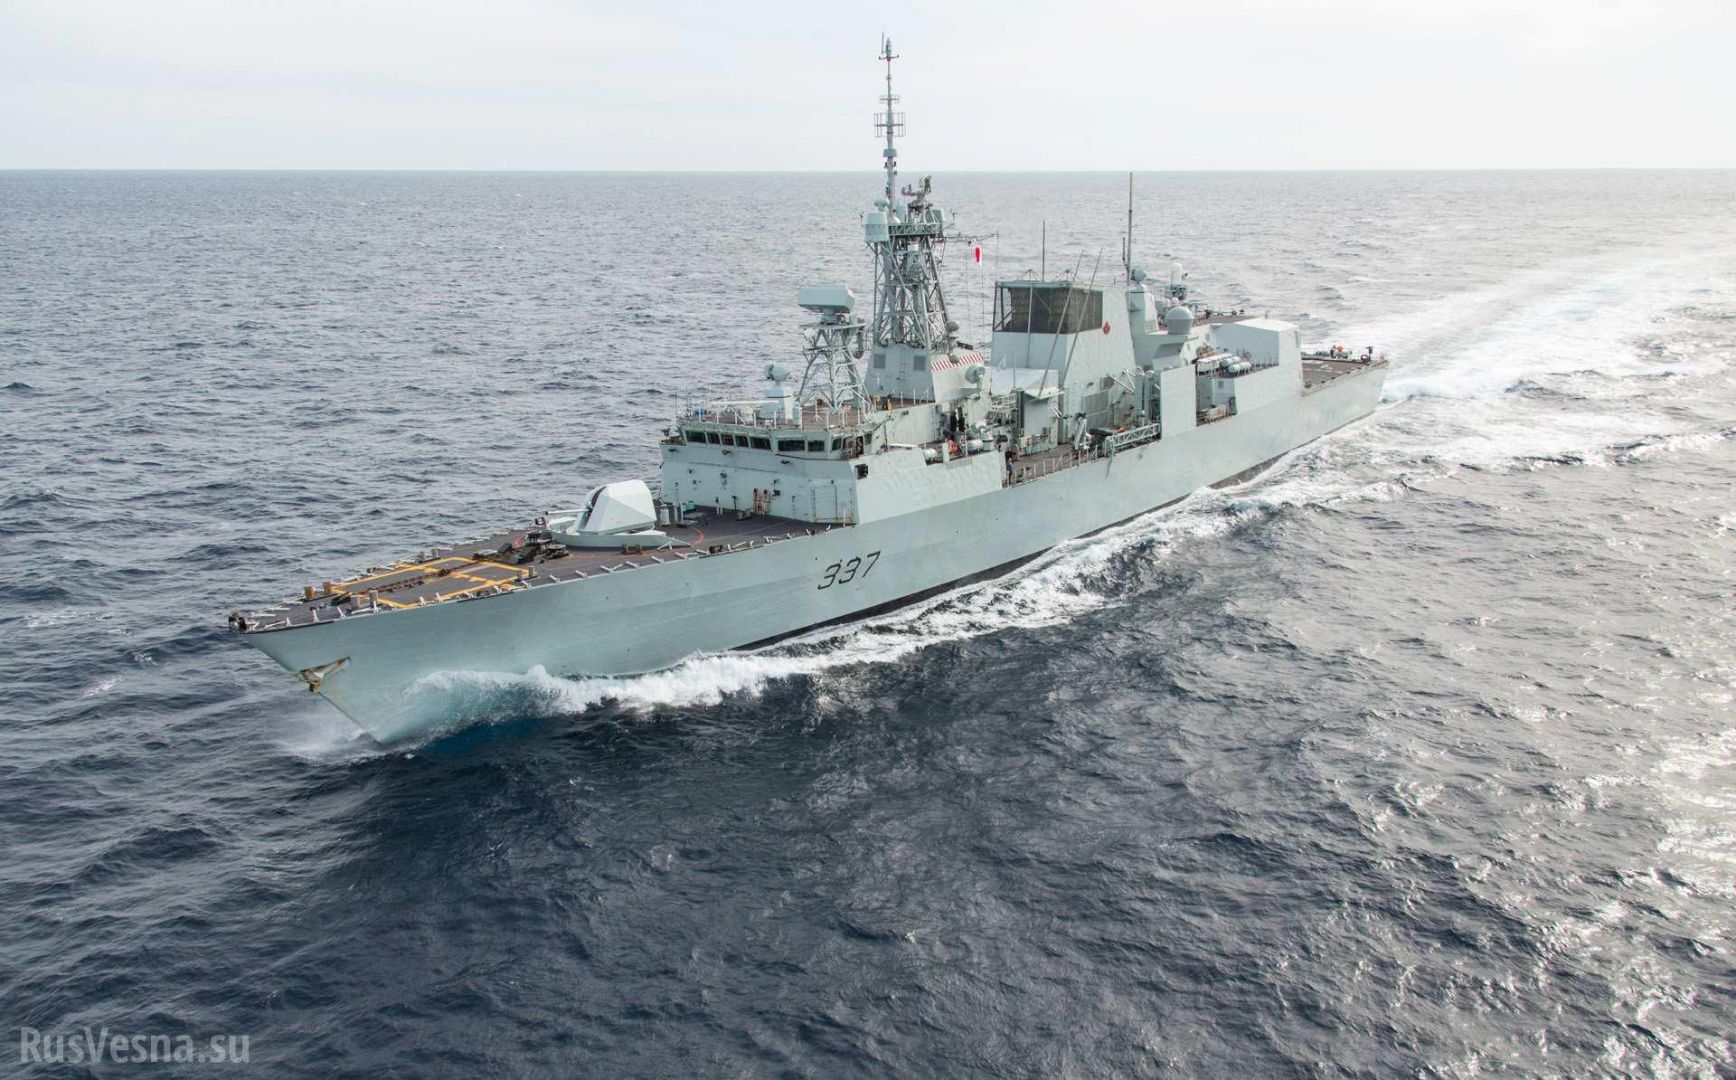 Canada sends 2 ships to enhance NATO readiness in Baltic region